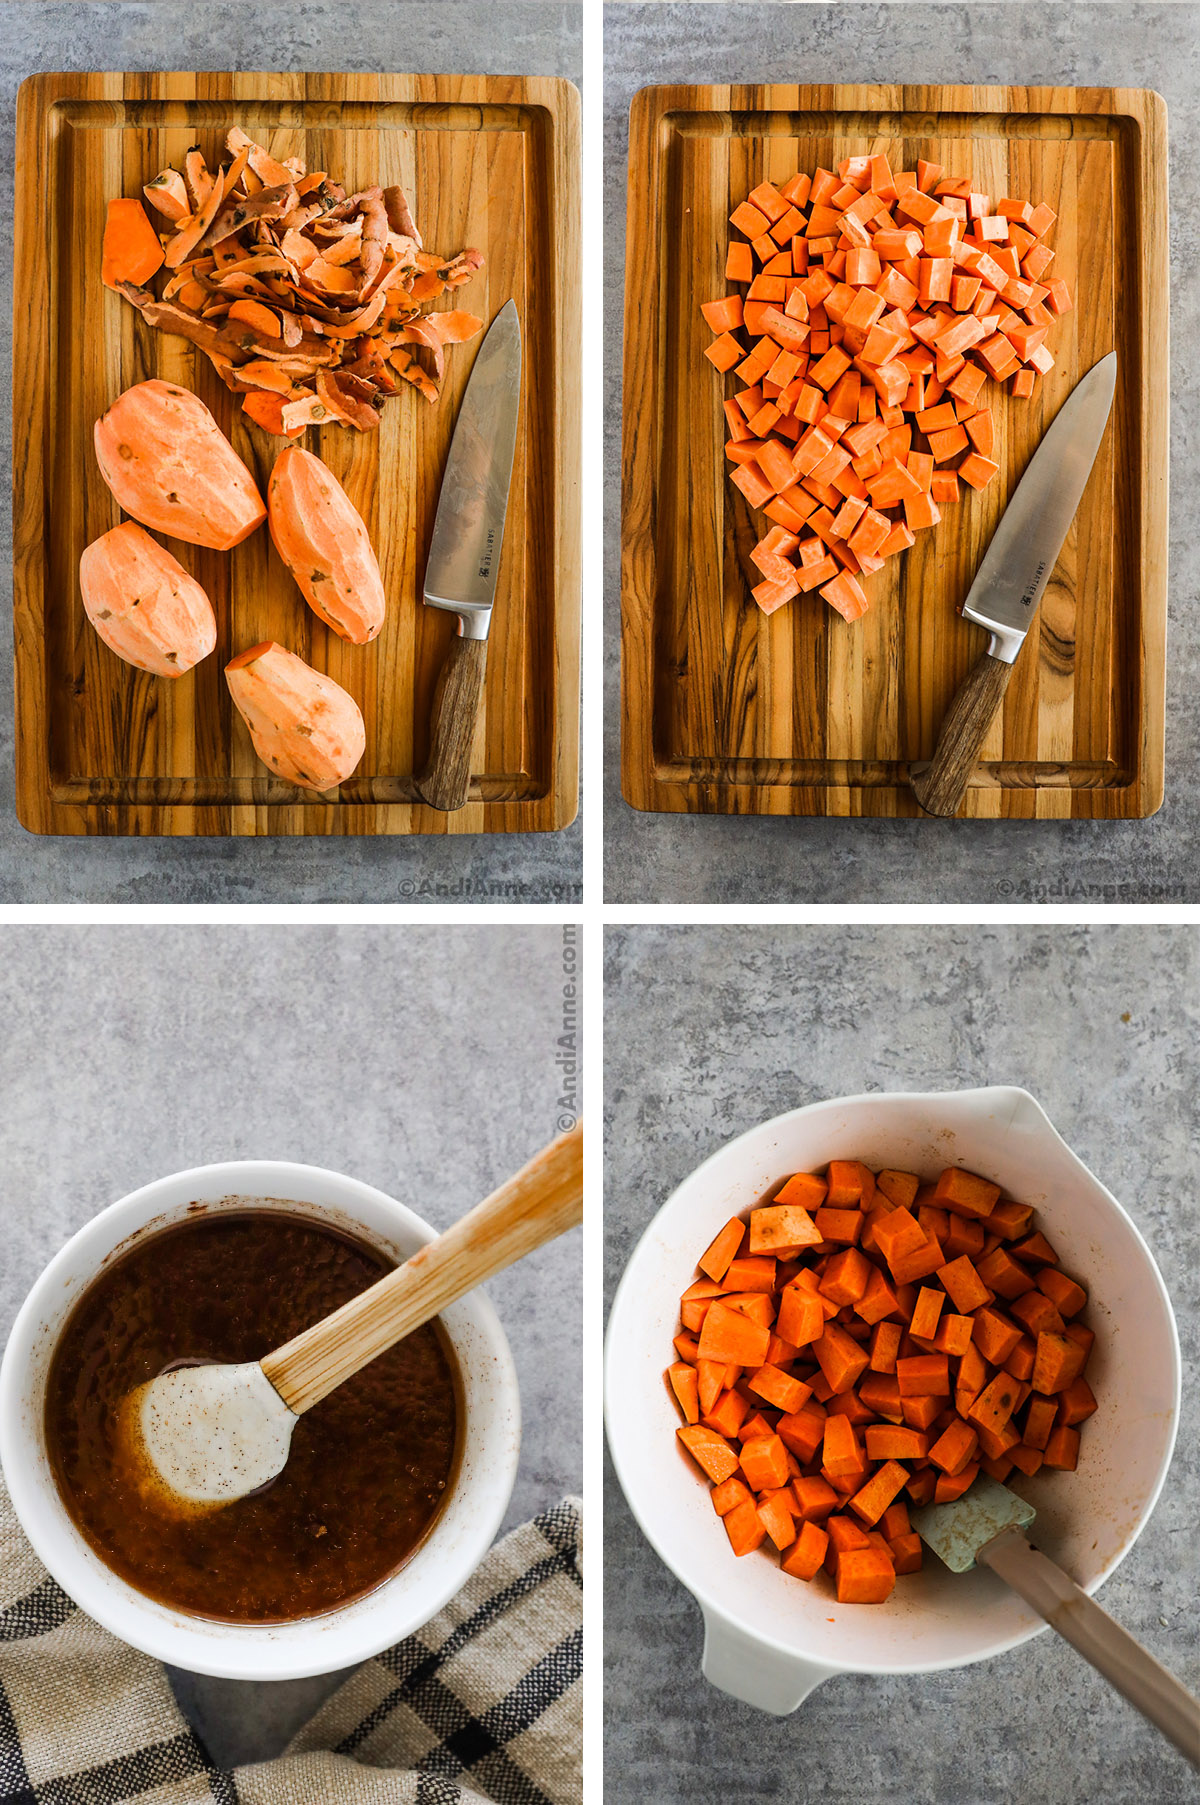 Four images showing steps to make recipe. First is peeled sweet potato, second is cubed sweet potato with knife, third is sauce mixed in a bowl, fourth is cubed sweet potato tossed with sauce ingredients.